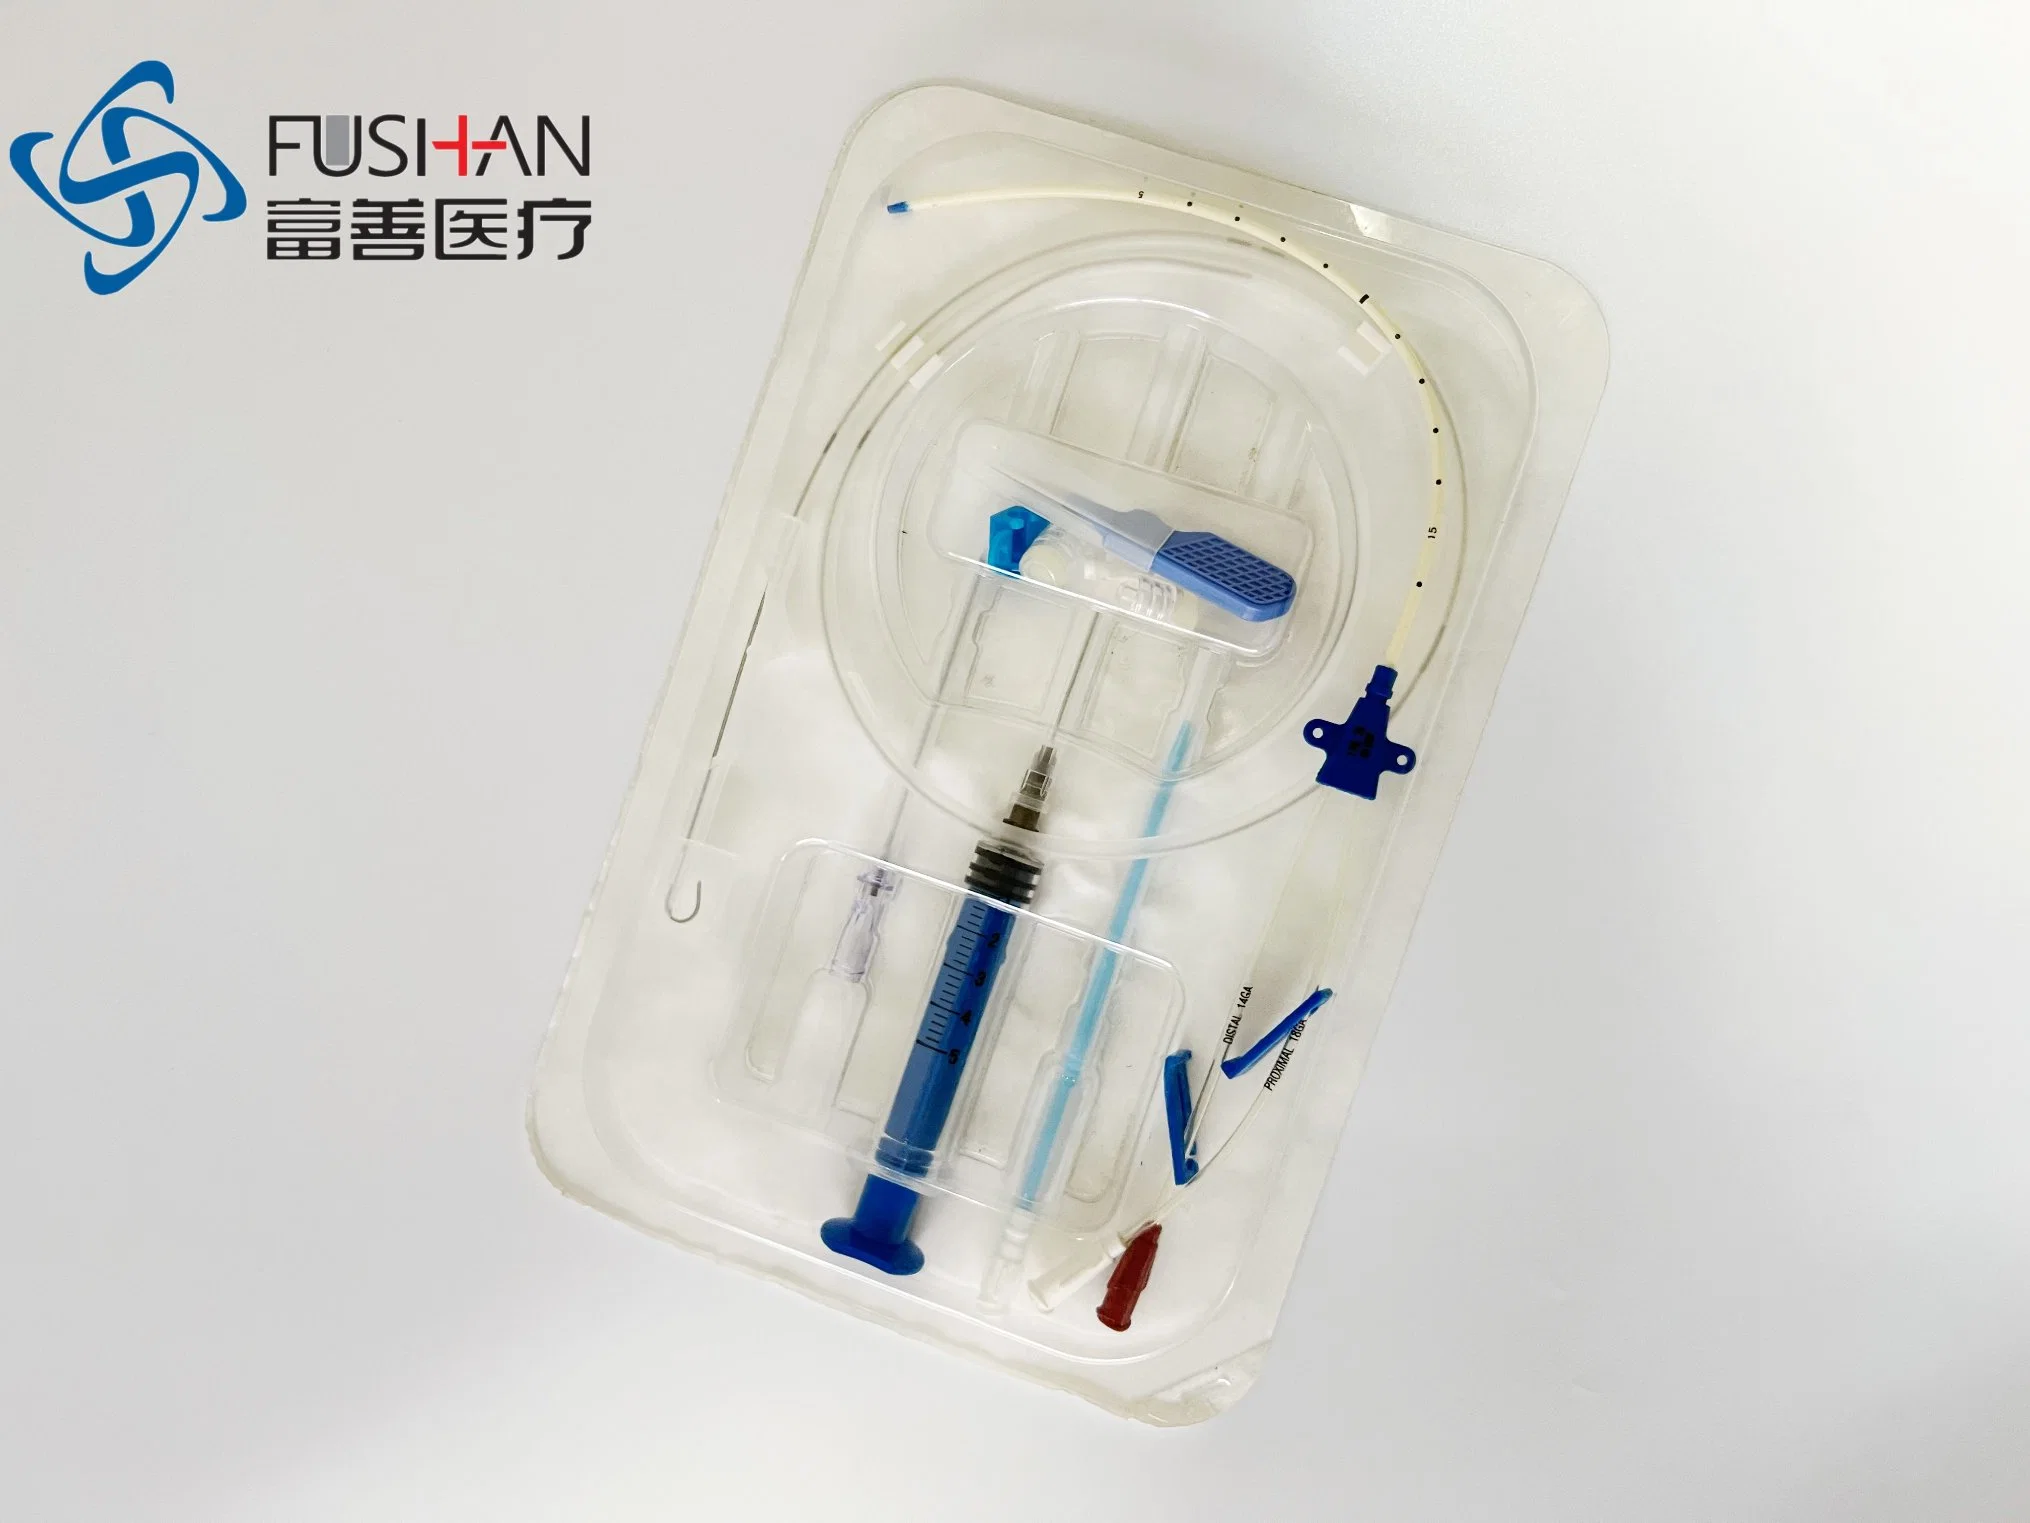 Fushan Medical Supply Kit Related Searches CVC Dialysis Catheter Infusion Set Disposables Equipment Catheter Chlorine Disinfectiondical